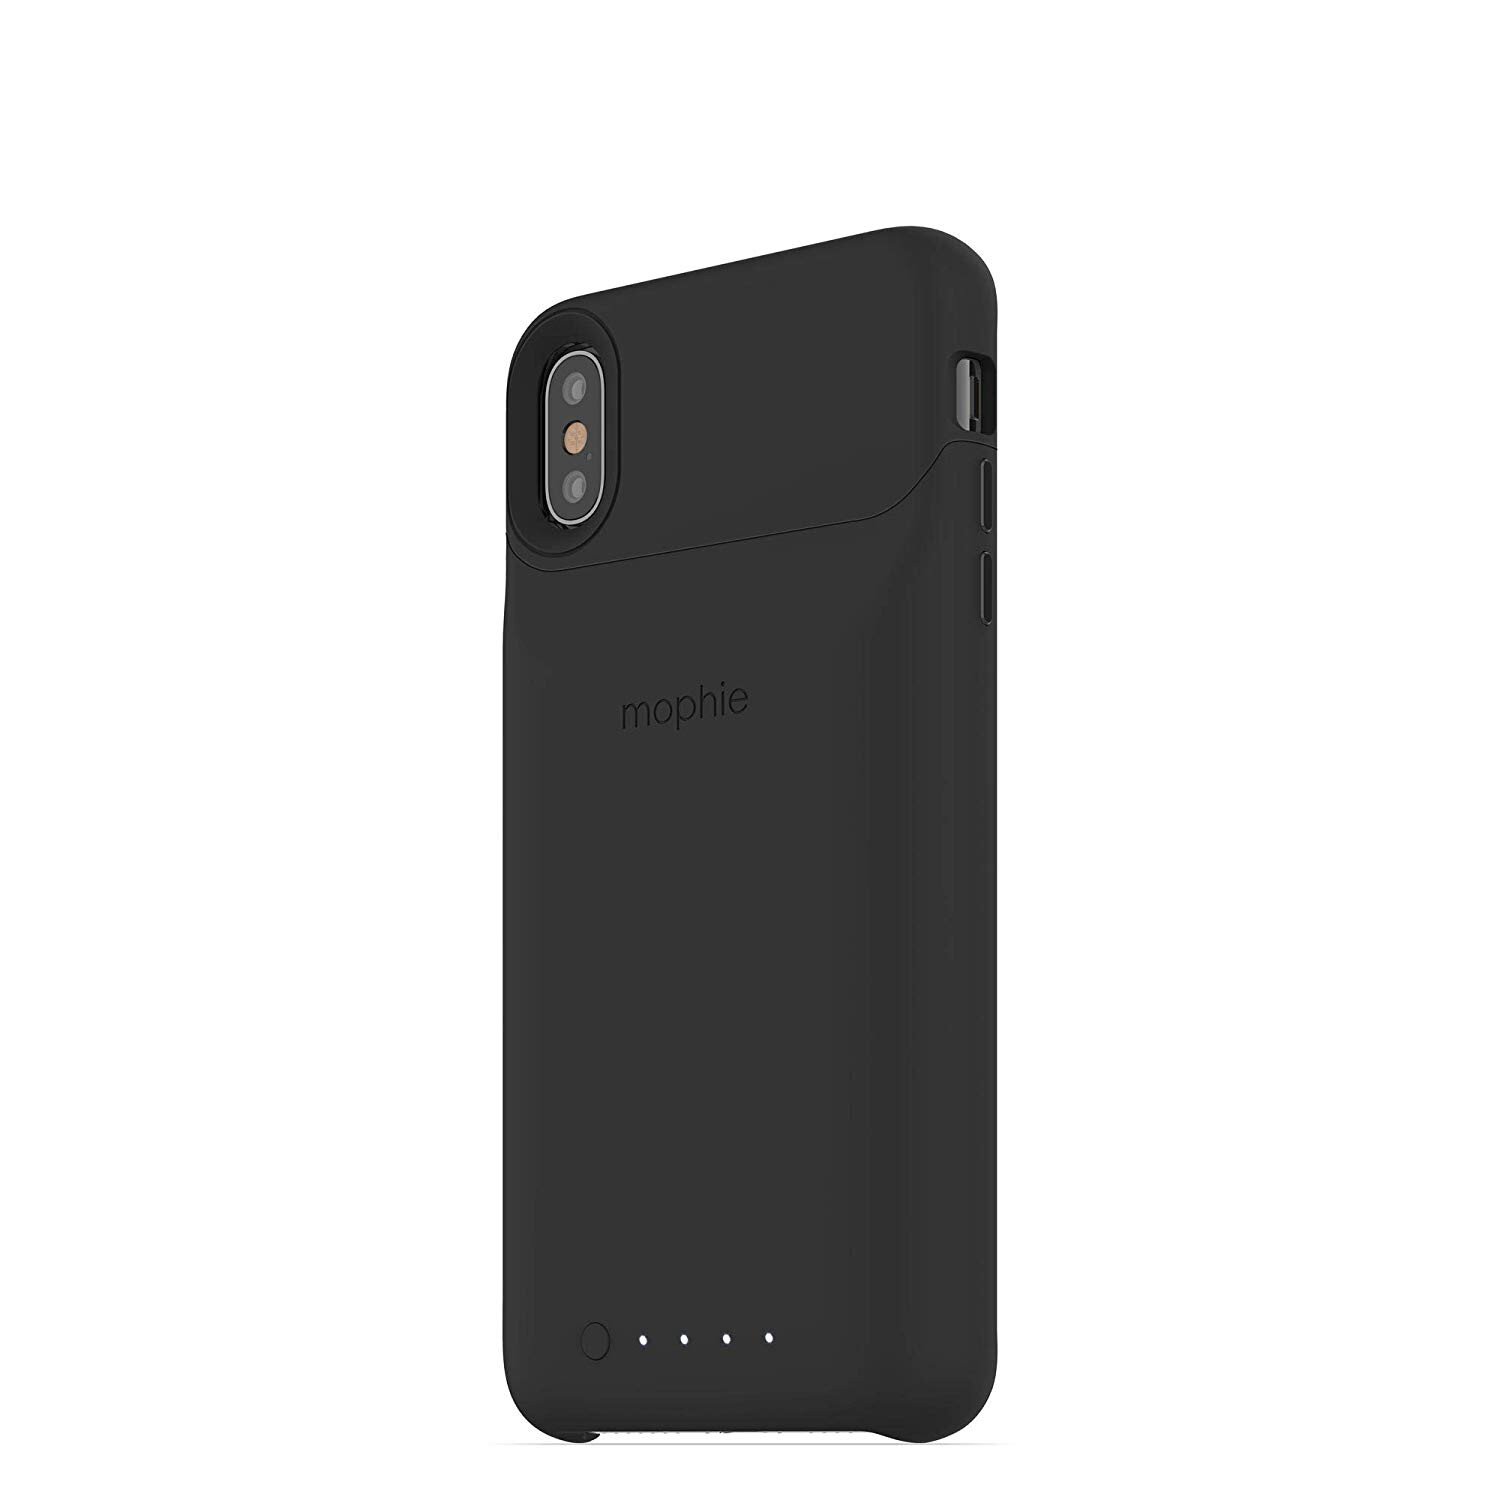 mophie Juice Pack Access Battery Case for Apple iPhone XS Max - Deep Red  for sale online